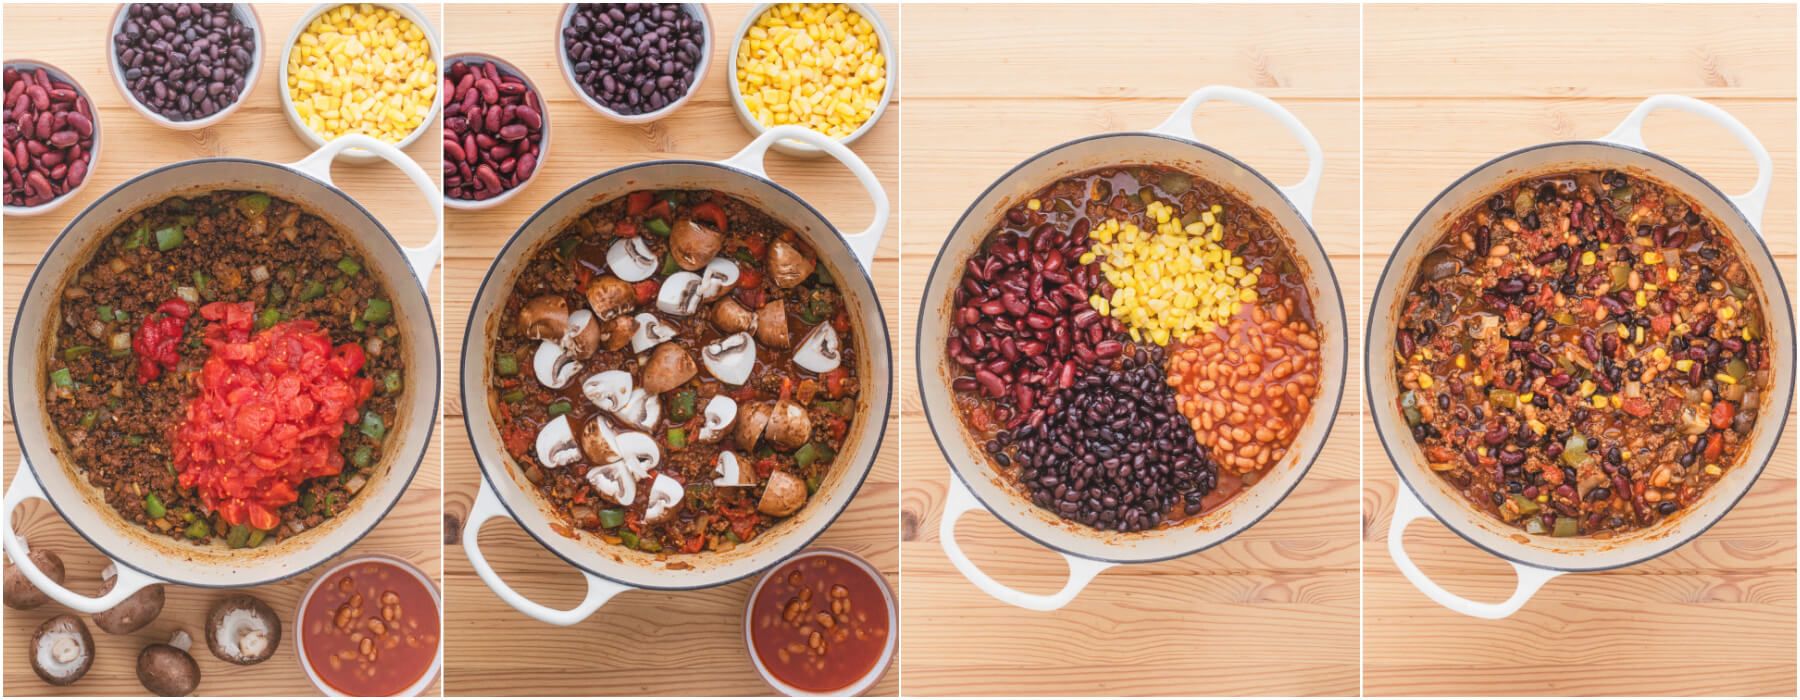 A series of process images showing the different stages of adding ingredients to chili.